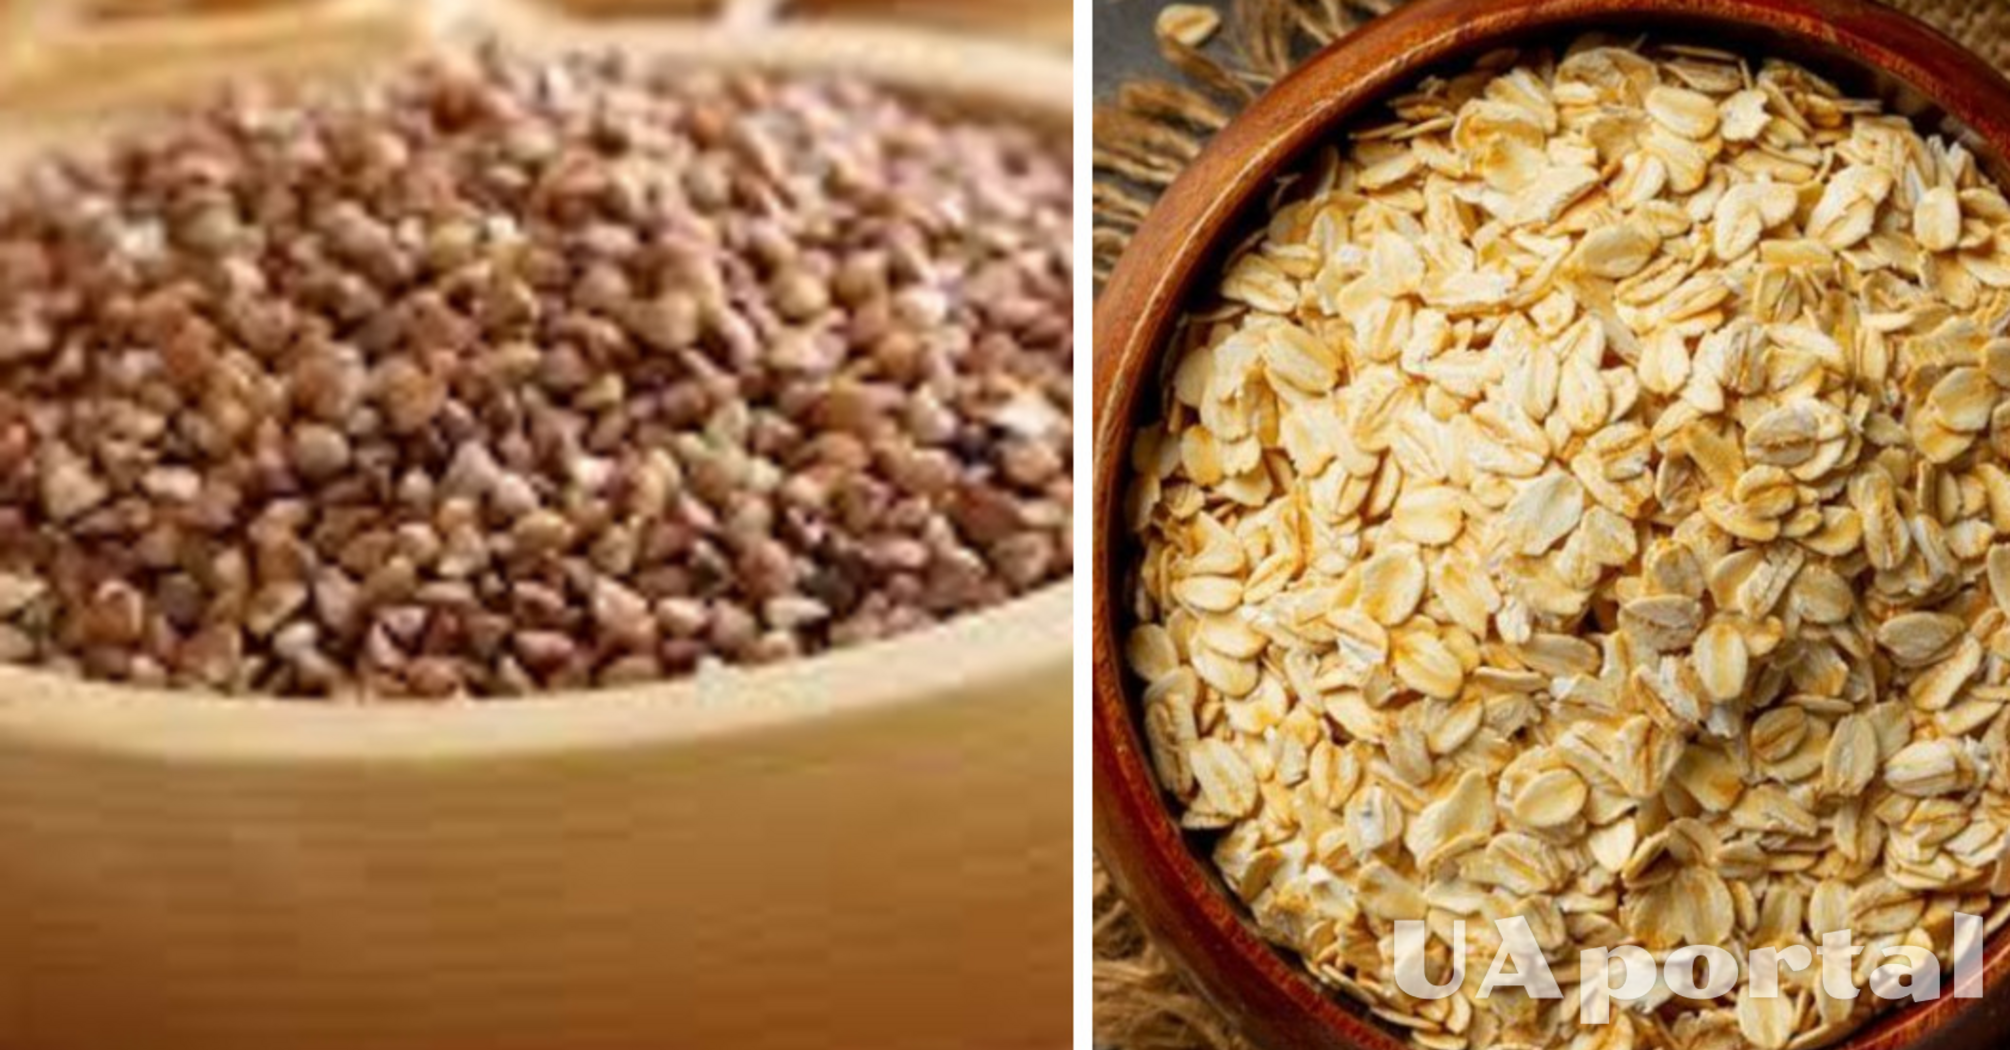 They provide a boost of energy and do not overload the stomach: 4 cereals to include in your diet